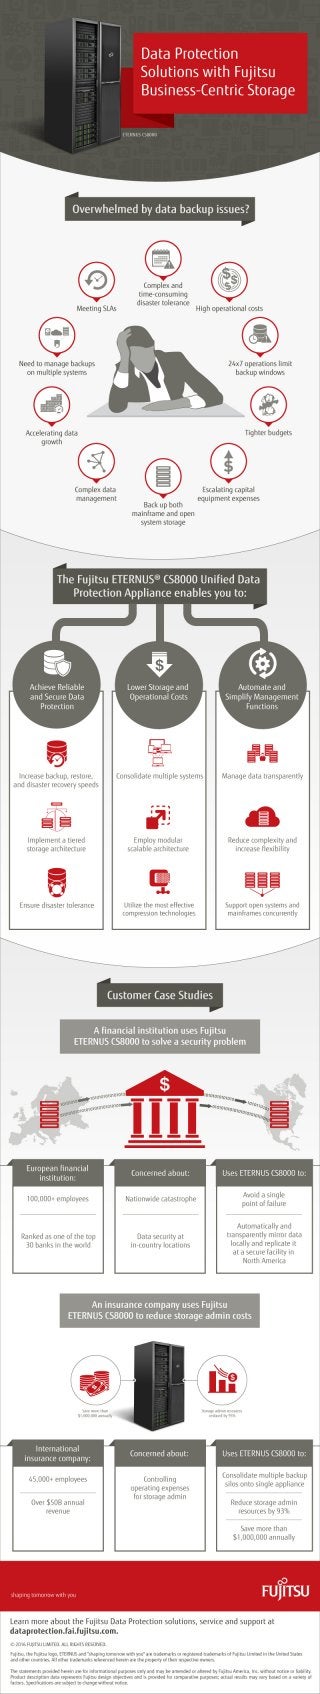 Data Protection Solutions with Fujitsu Business-Centric Storage